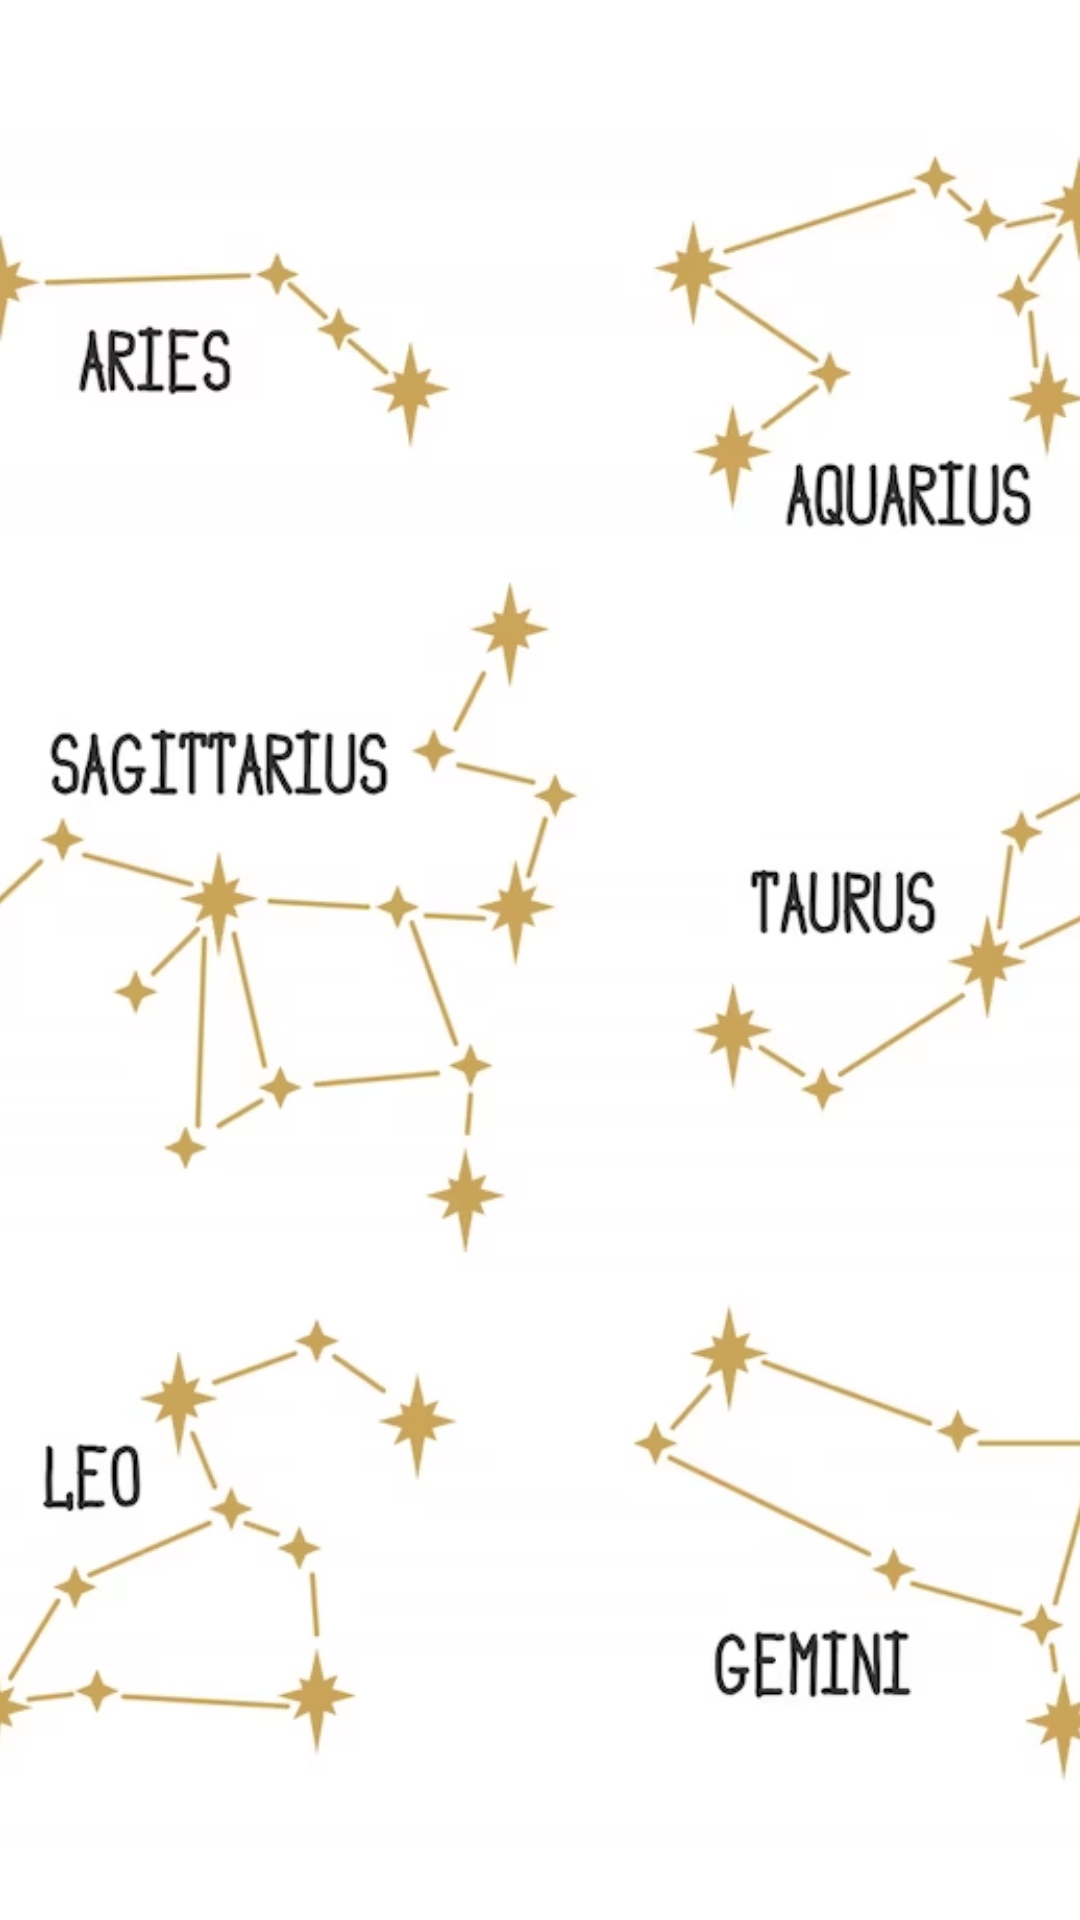 Know right gemstone according to your zodiac sign